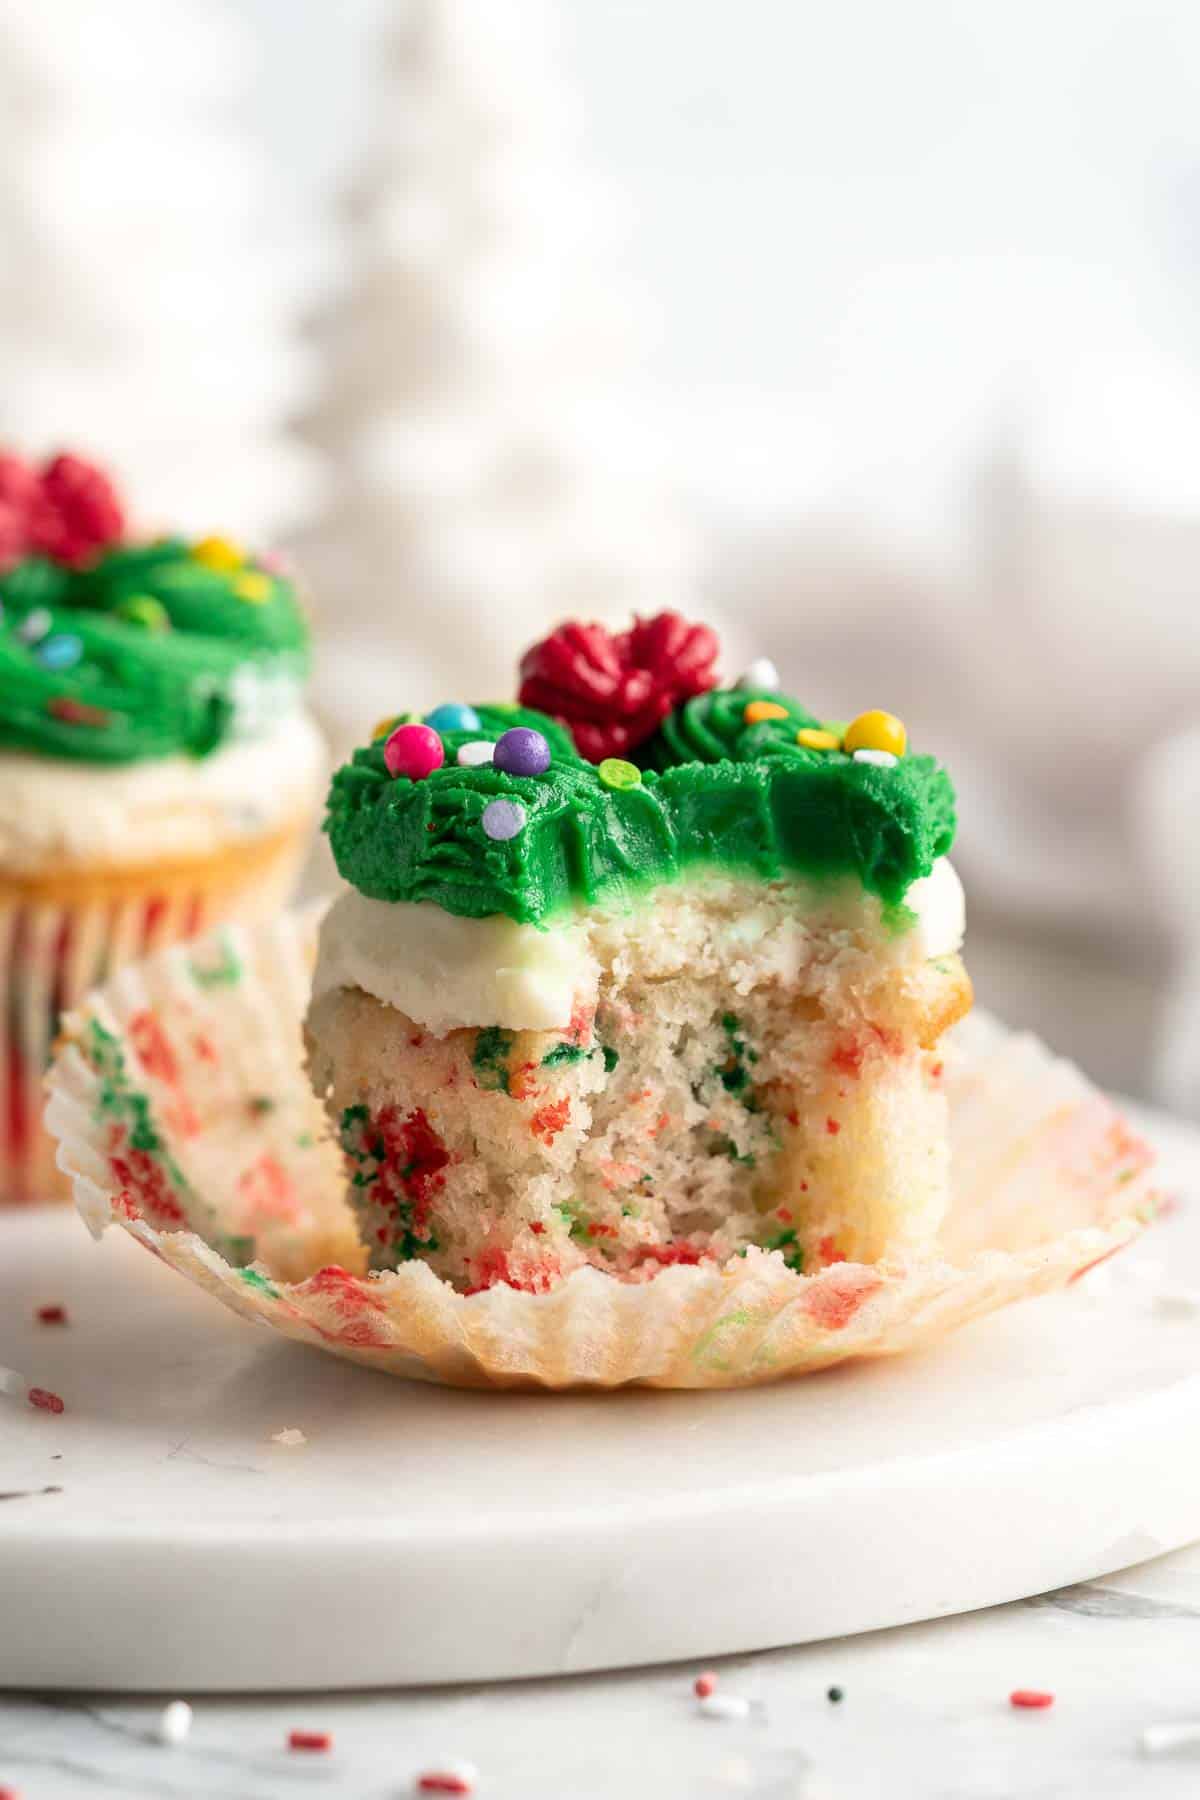 These festive Christmas Cupcakes are made of moist and fluffy vanilla funfetti cake topped with red and green buttercream frosting. So fun to make! | aheadofthyme.com